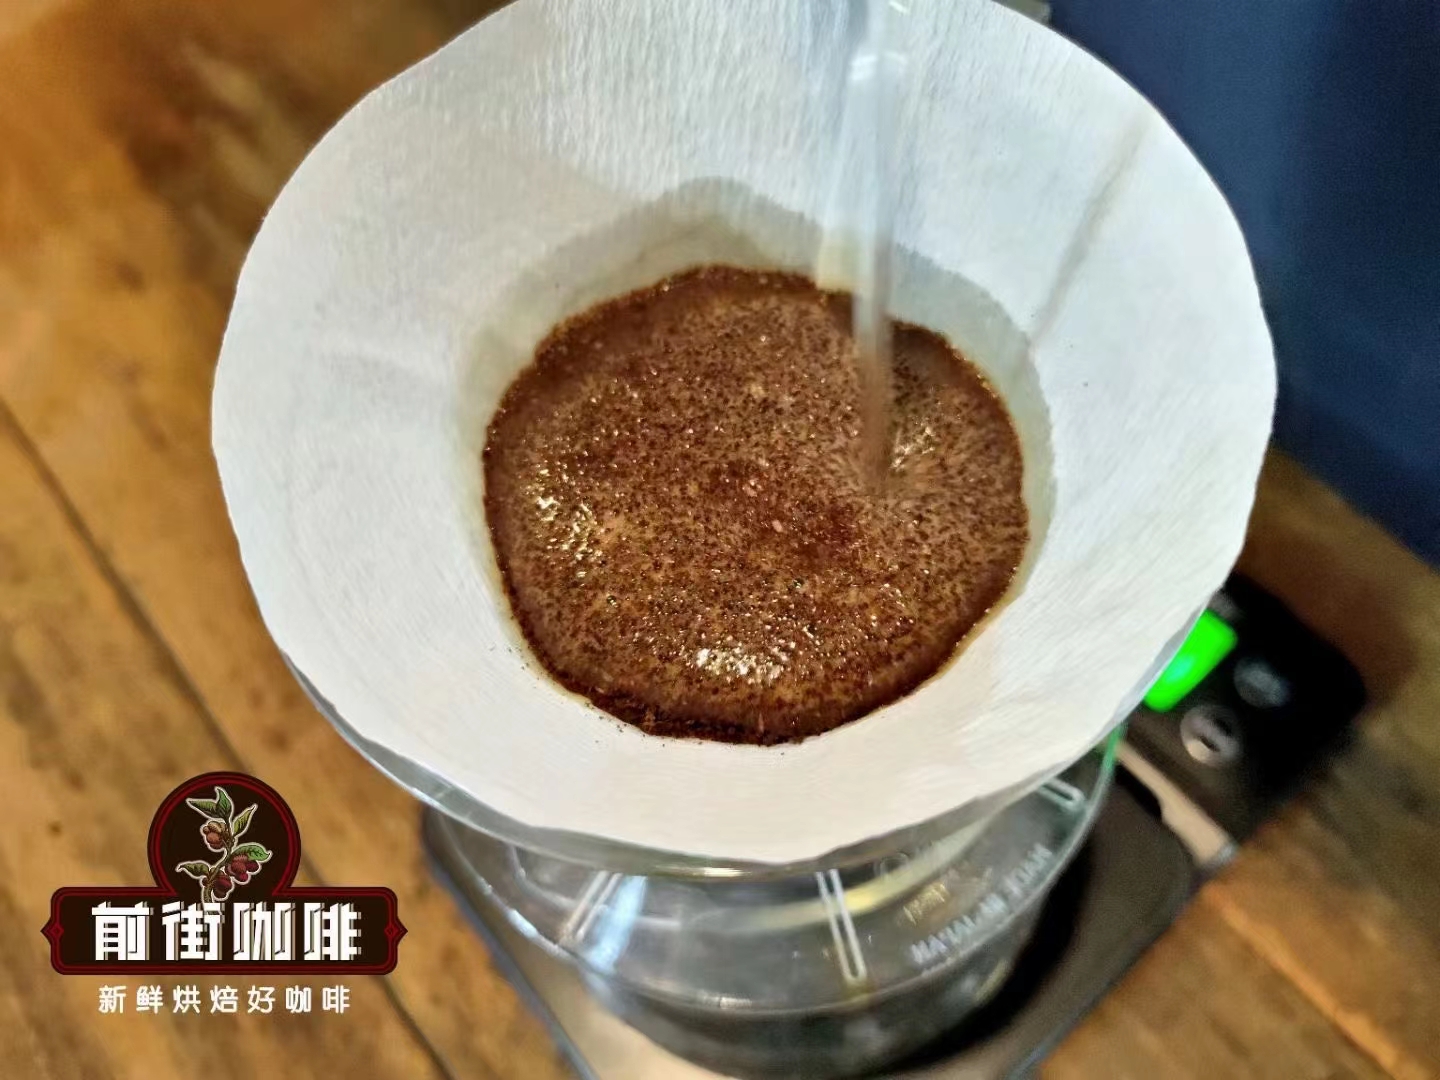 The technique principle of three-stage water injection of hand-brewed coffee the advantages and disadvantages of three-stage water injection of hand-made coffee